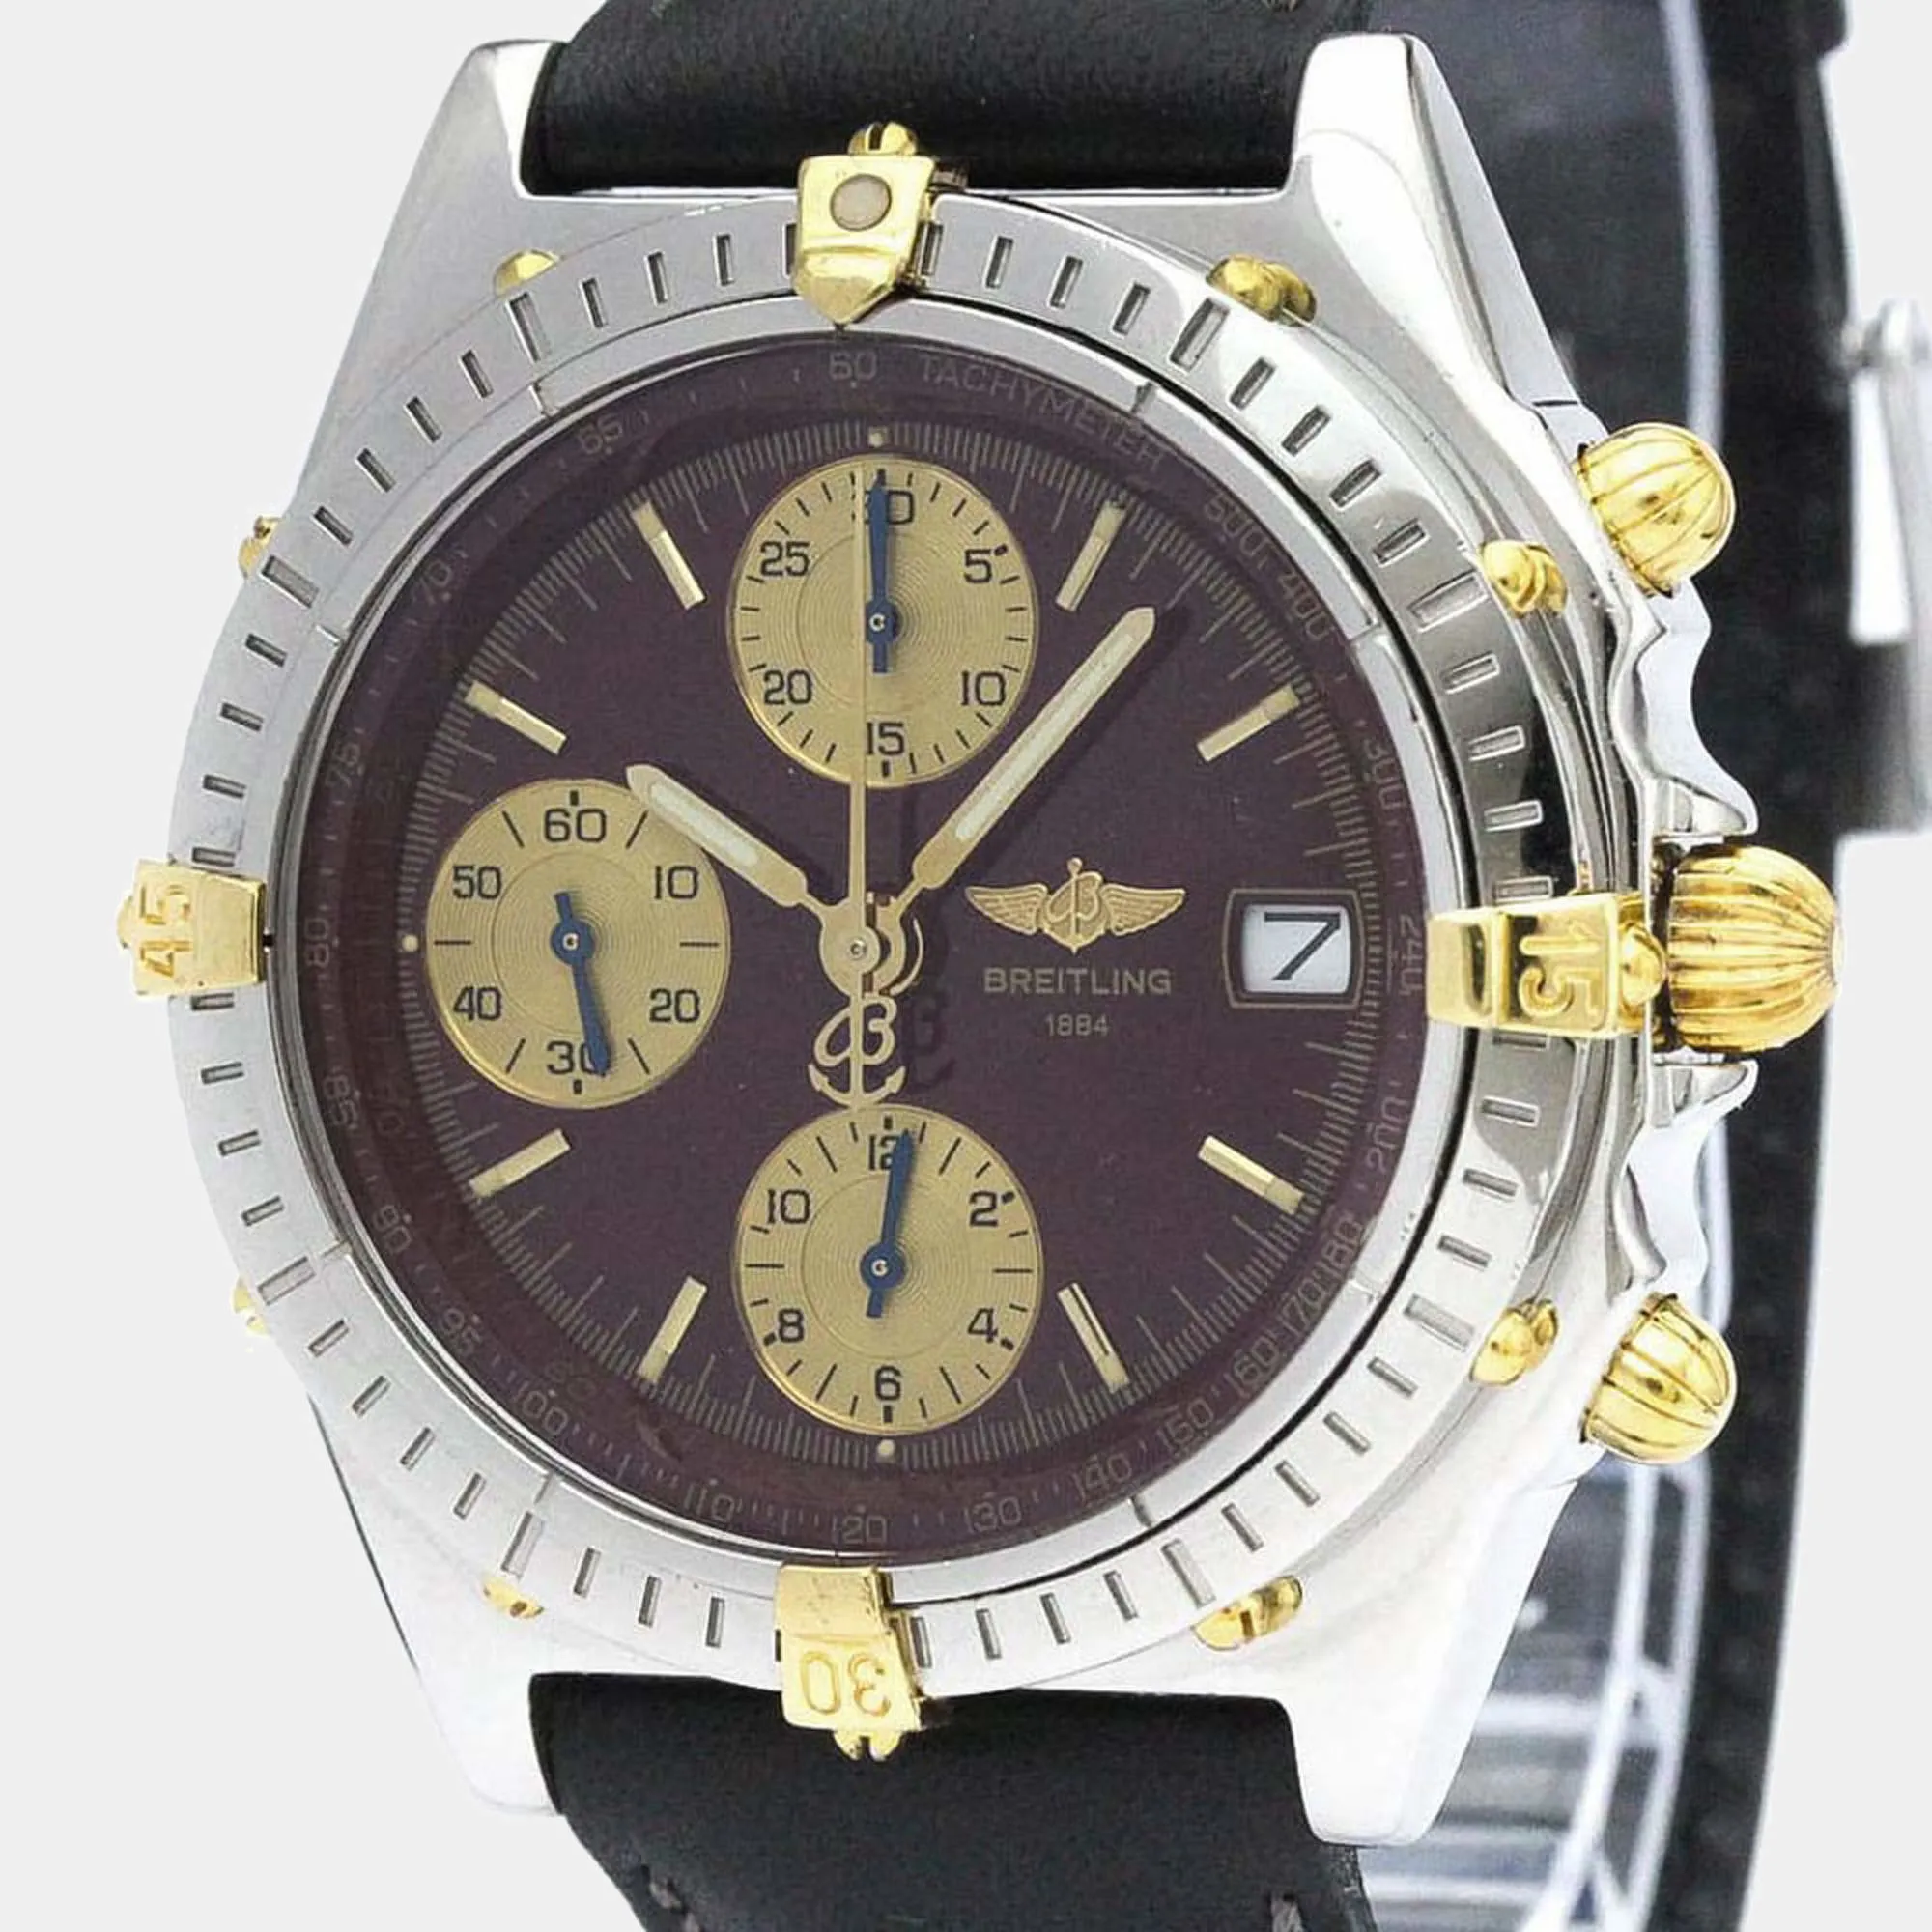 Breitling Chronomat B13050.1 40mm Yellow gold and stainless steel